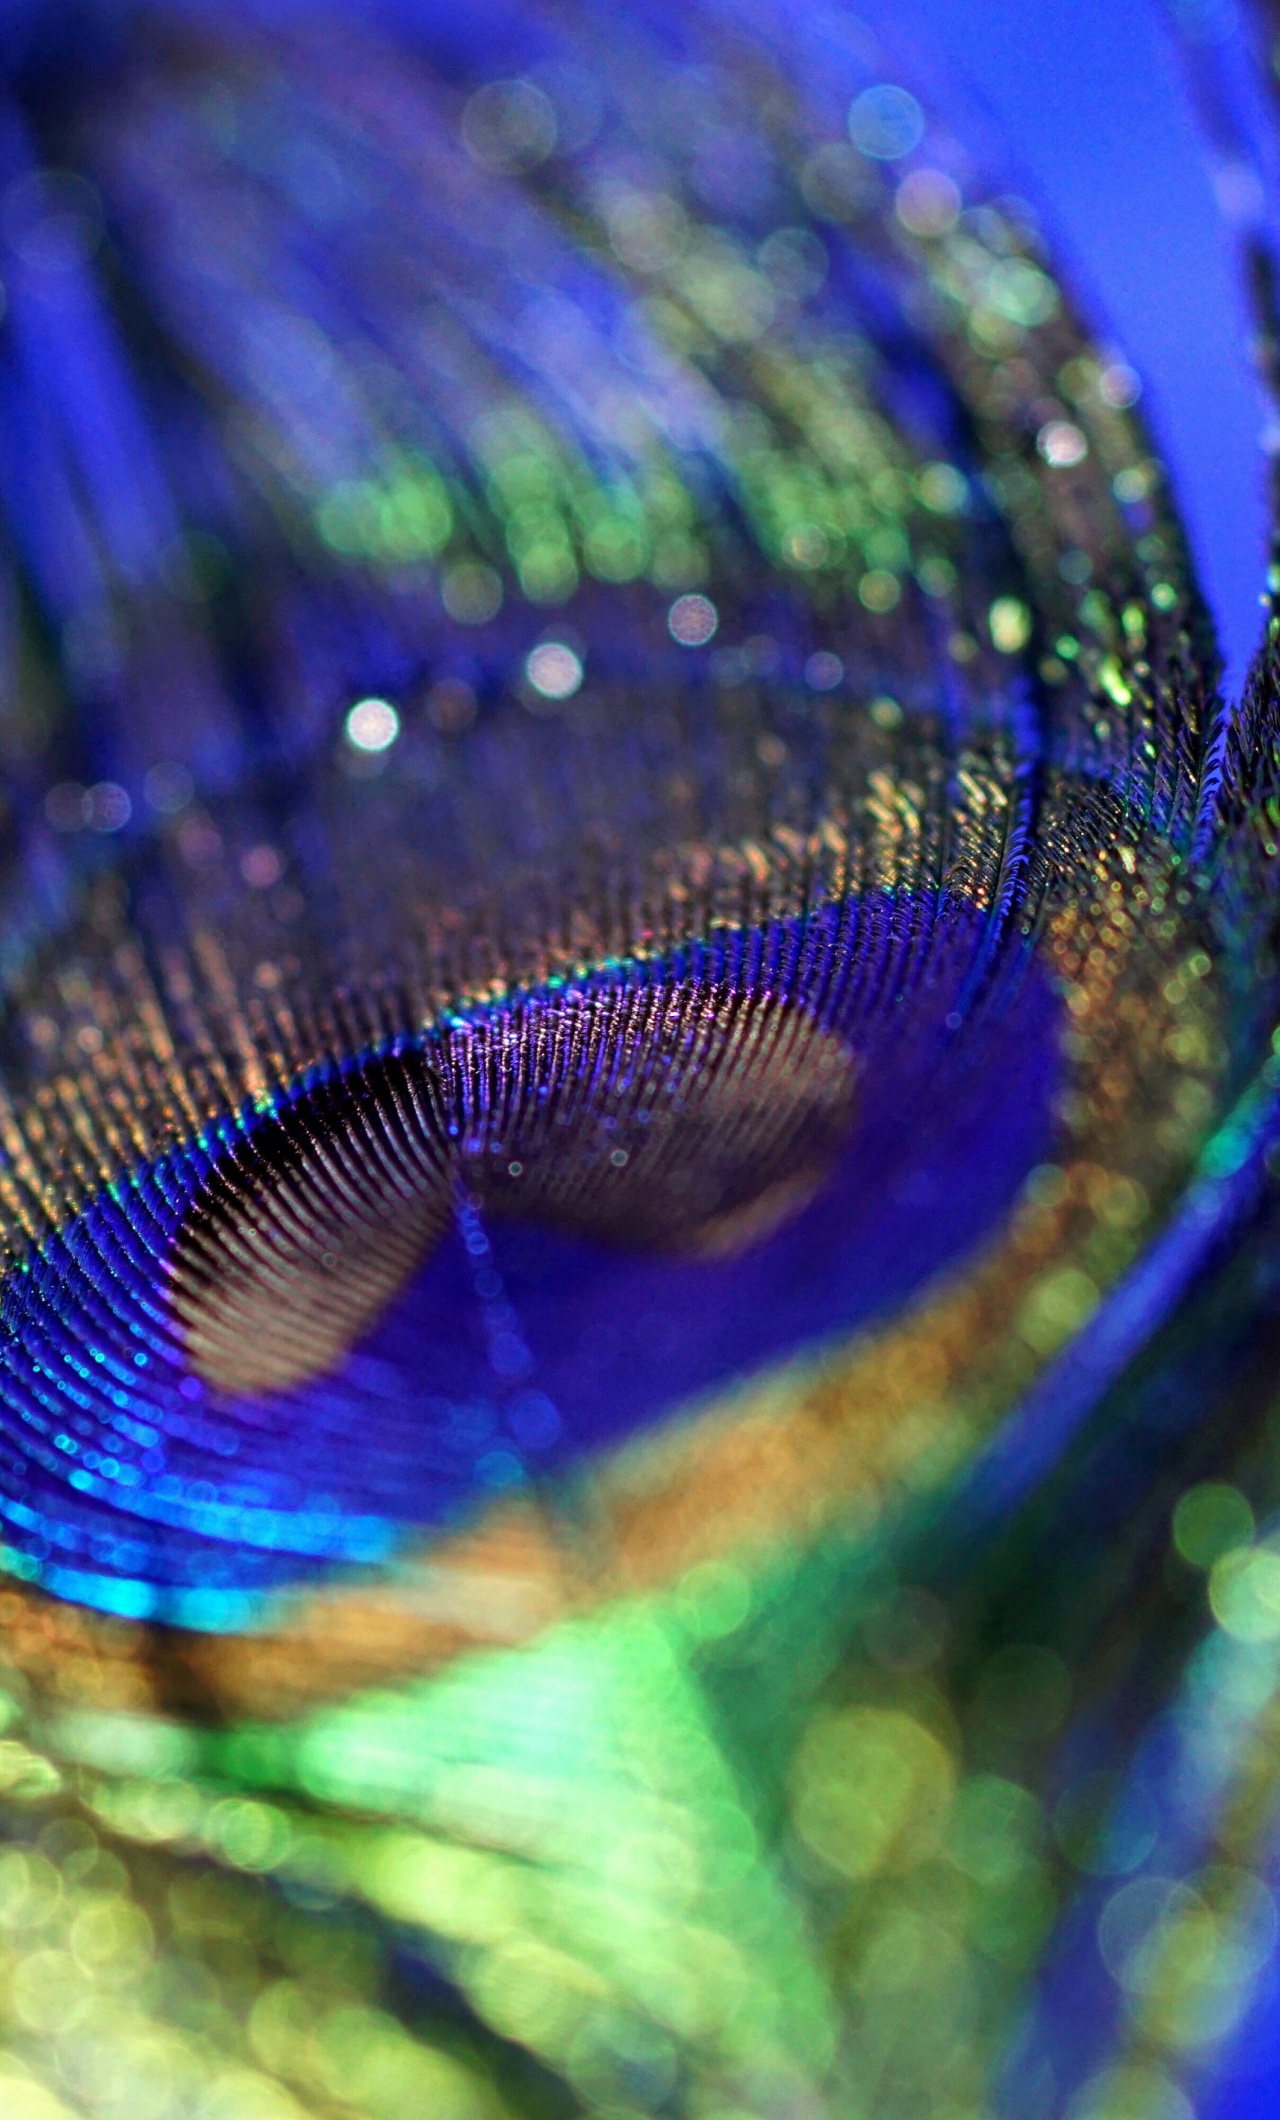 Peacock, Plumage, Feather, Colorful, Close Up, Bokeh, - Peacock Feather  Wallpaper Hd For Mobile - 1280x2120 Wallpaper 